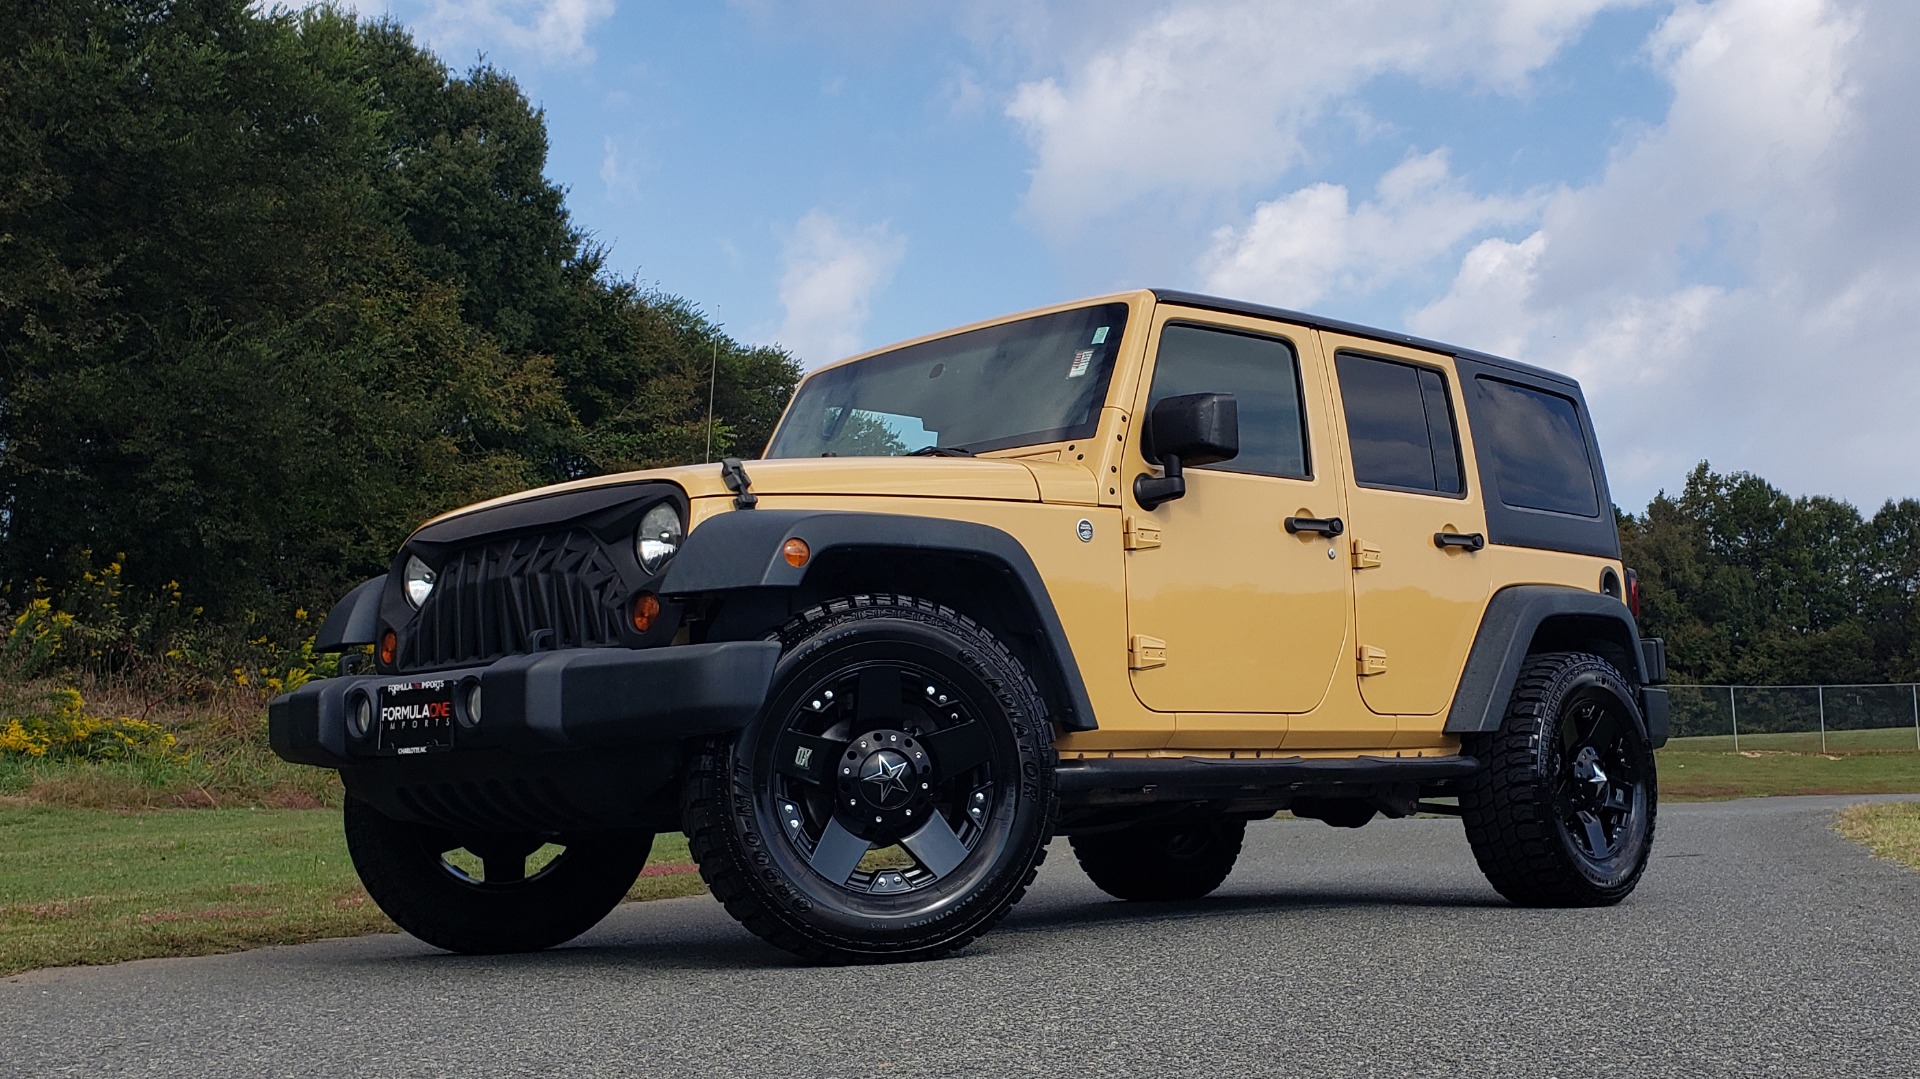 Used 2013 Jeep WRANGLER UNLIMITED SPORT 4X4 / 3.6L V6 / 5-SPD AUTO / 3-PC FREEDOM TOP for sale Sold at Formula Imports in Charlotte NC 28227 1